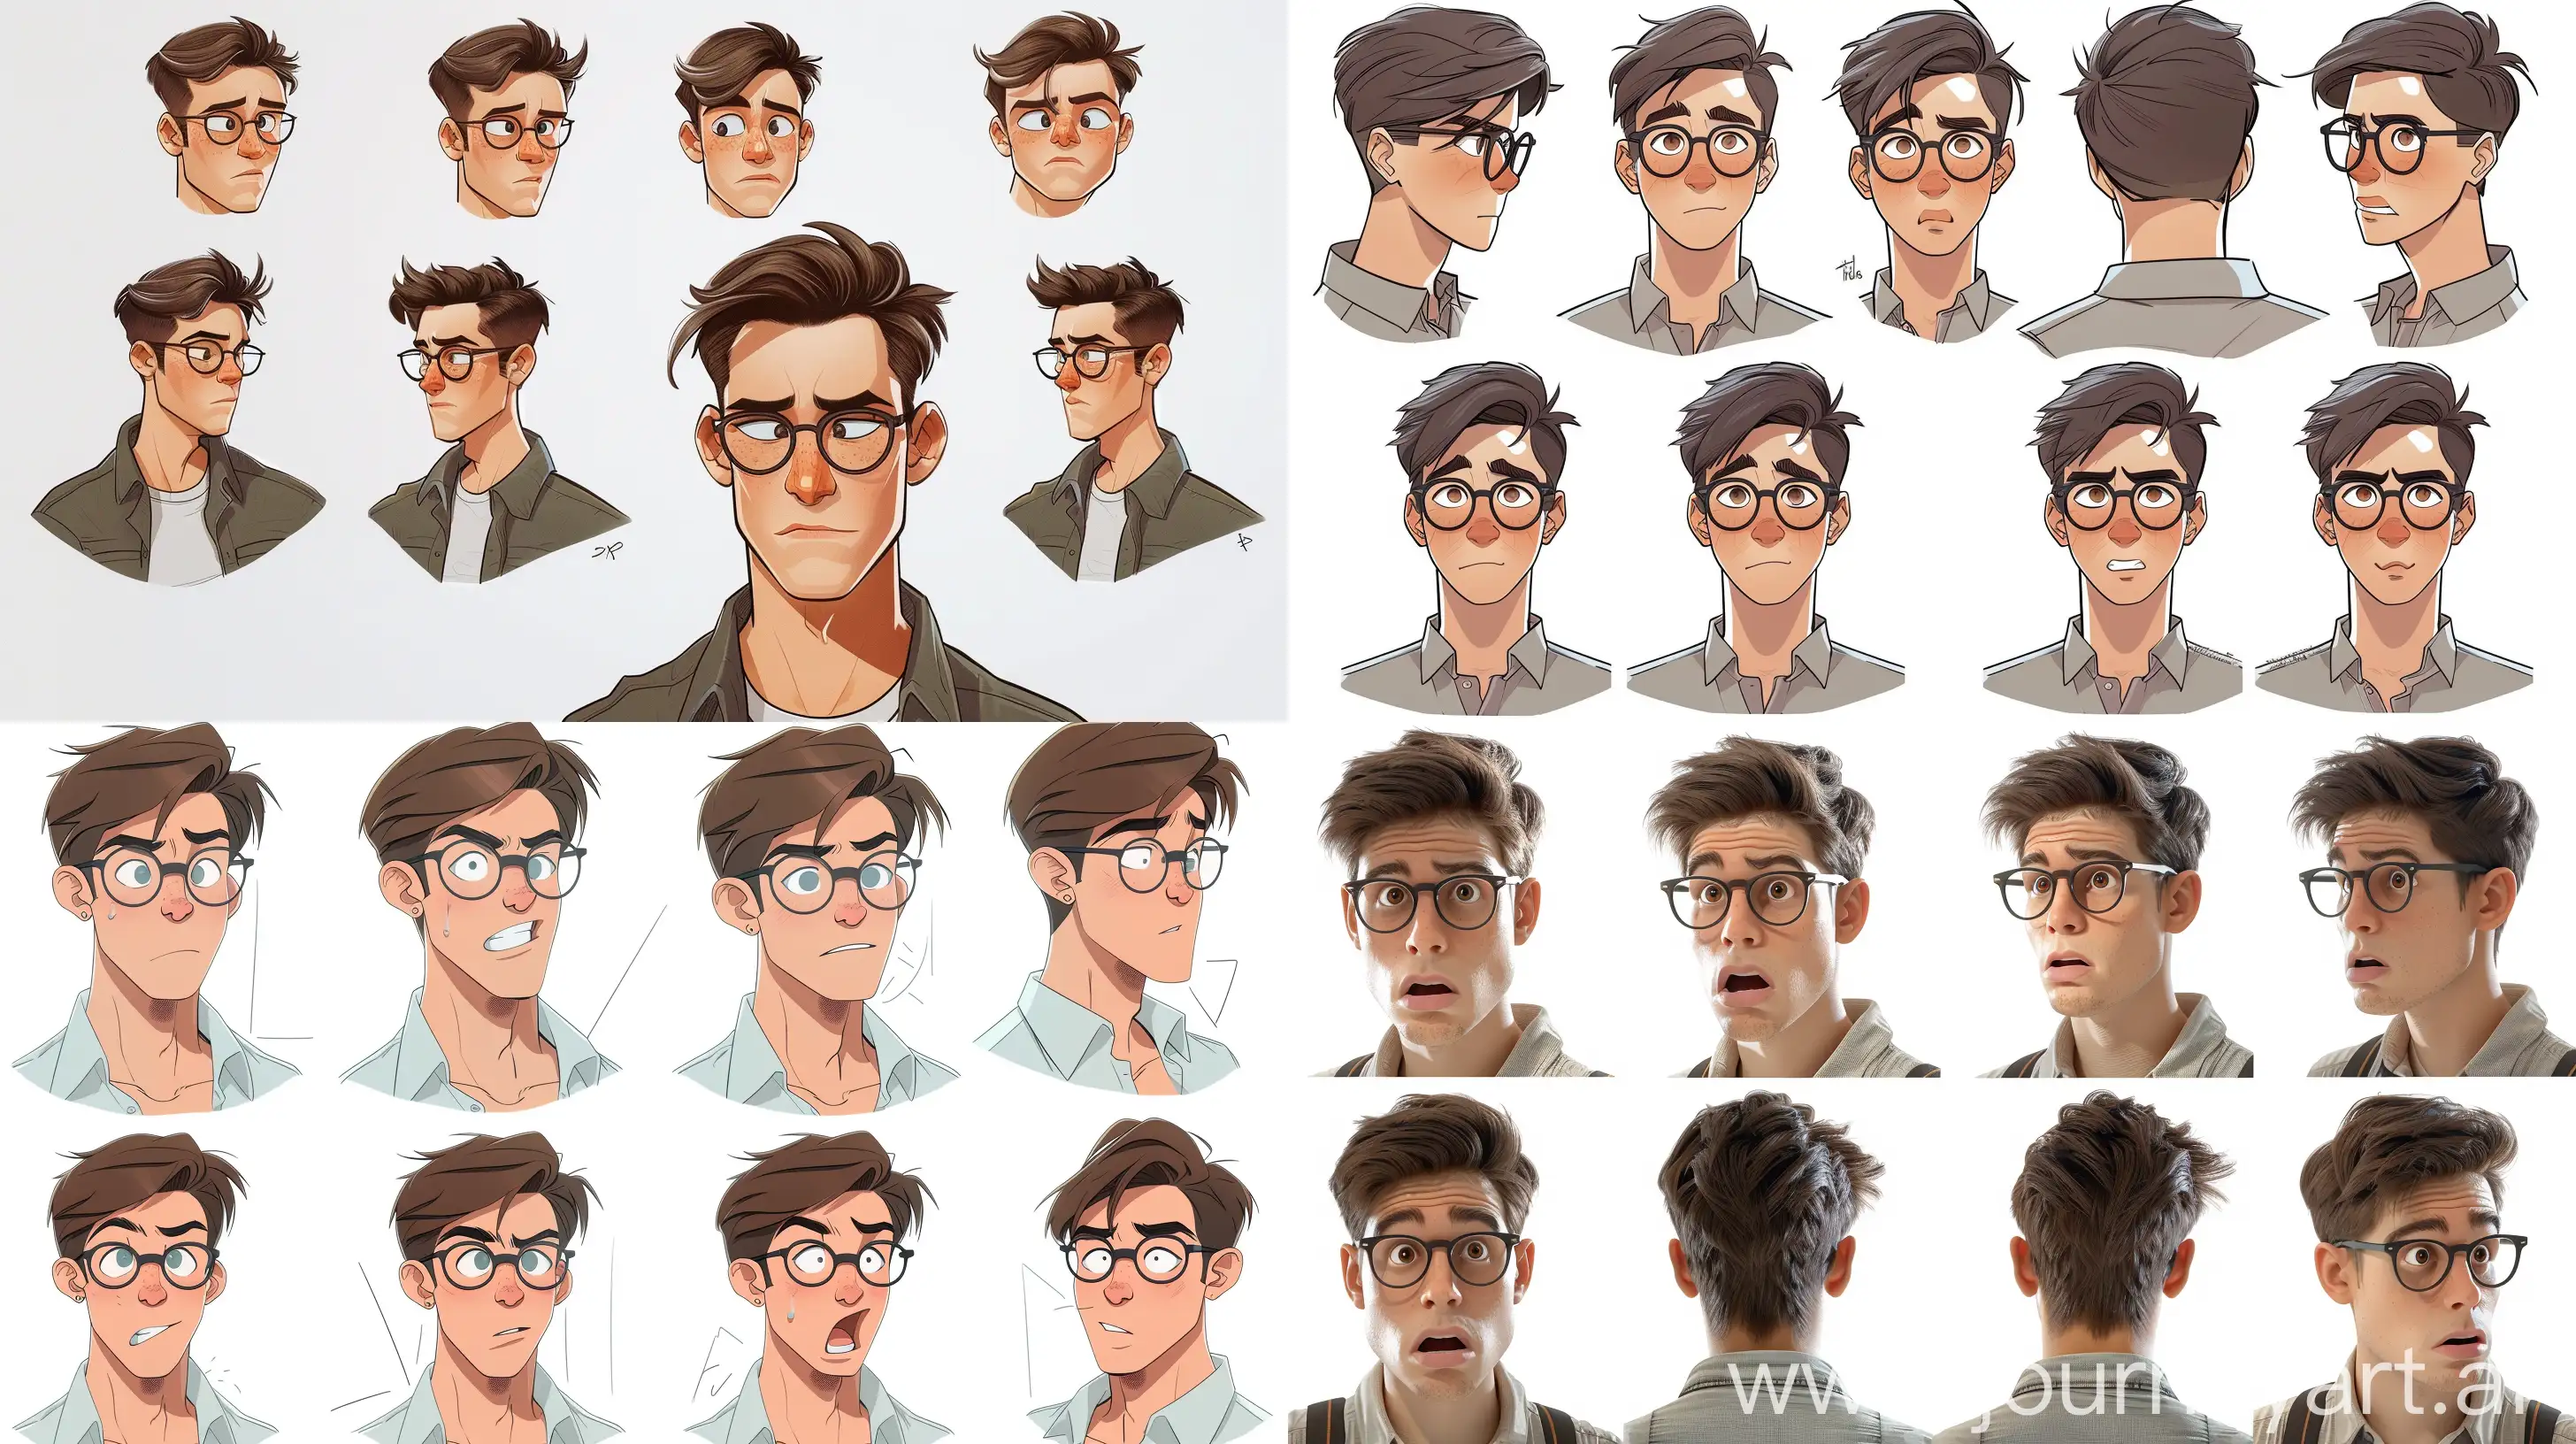 Disney-Pixar-Style-Portrait-5-Handsome-Young-Men-in-Glasses-and-Various-Expressions